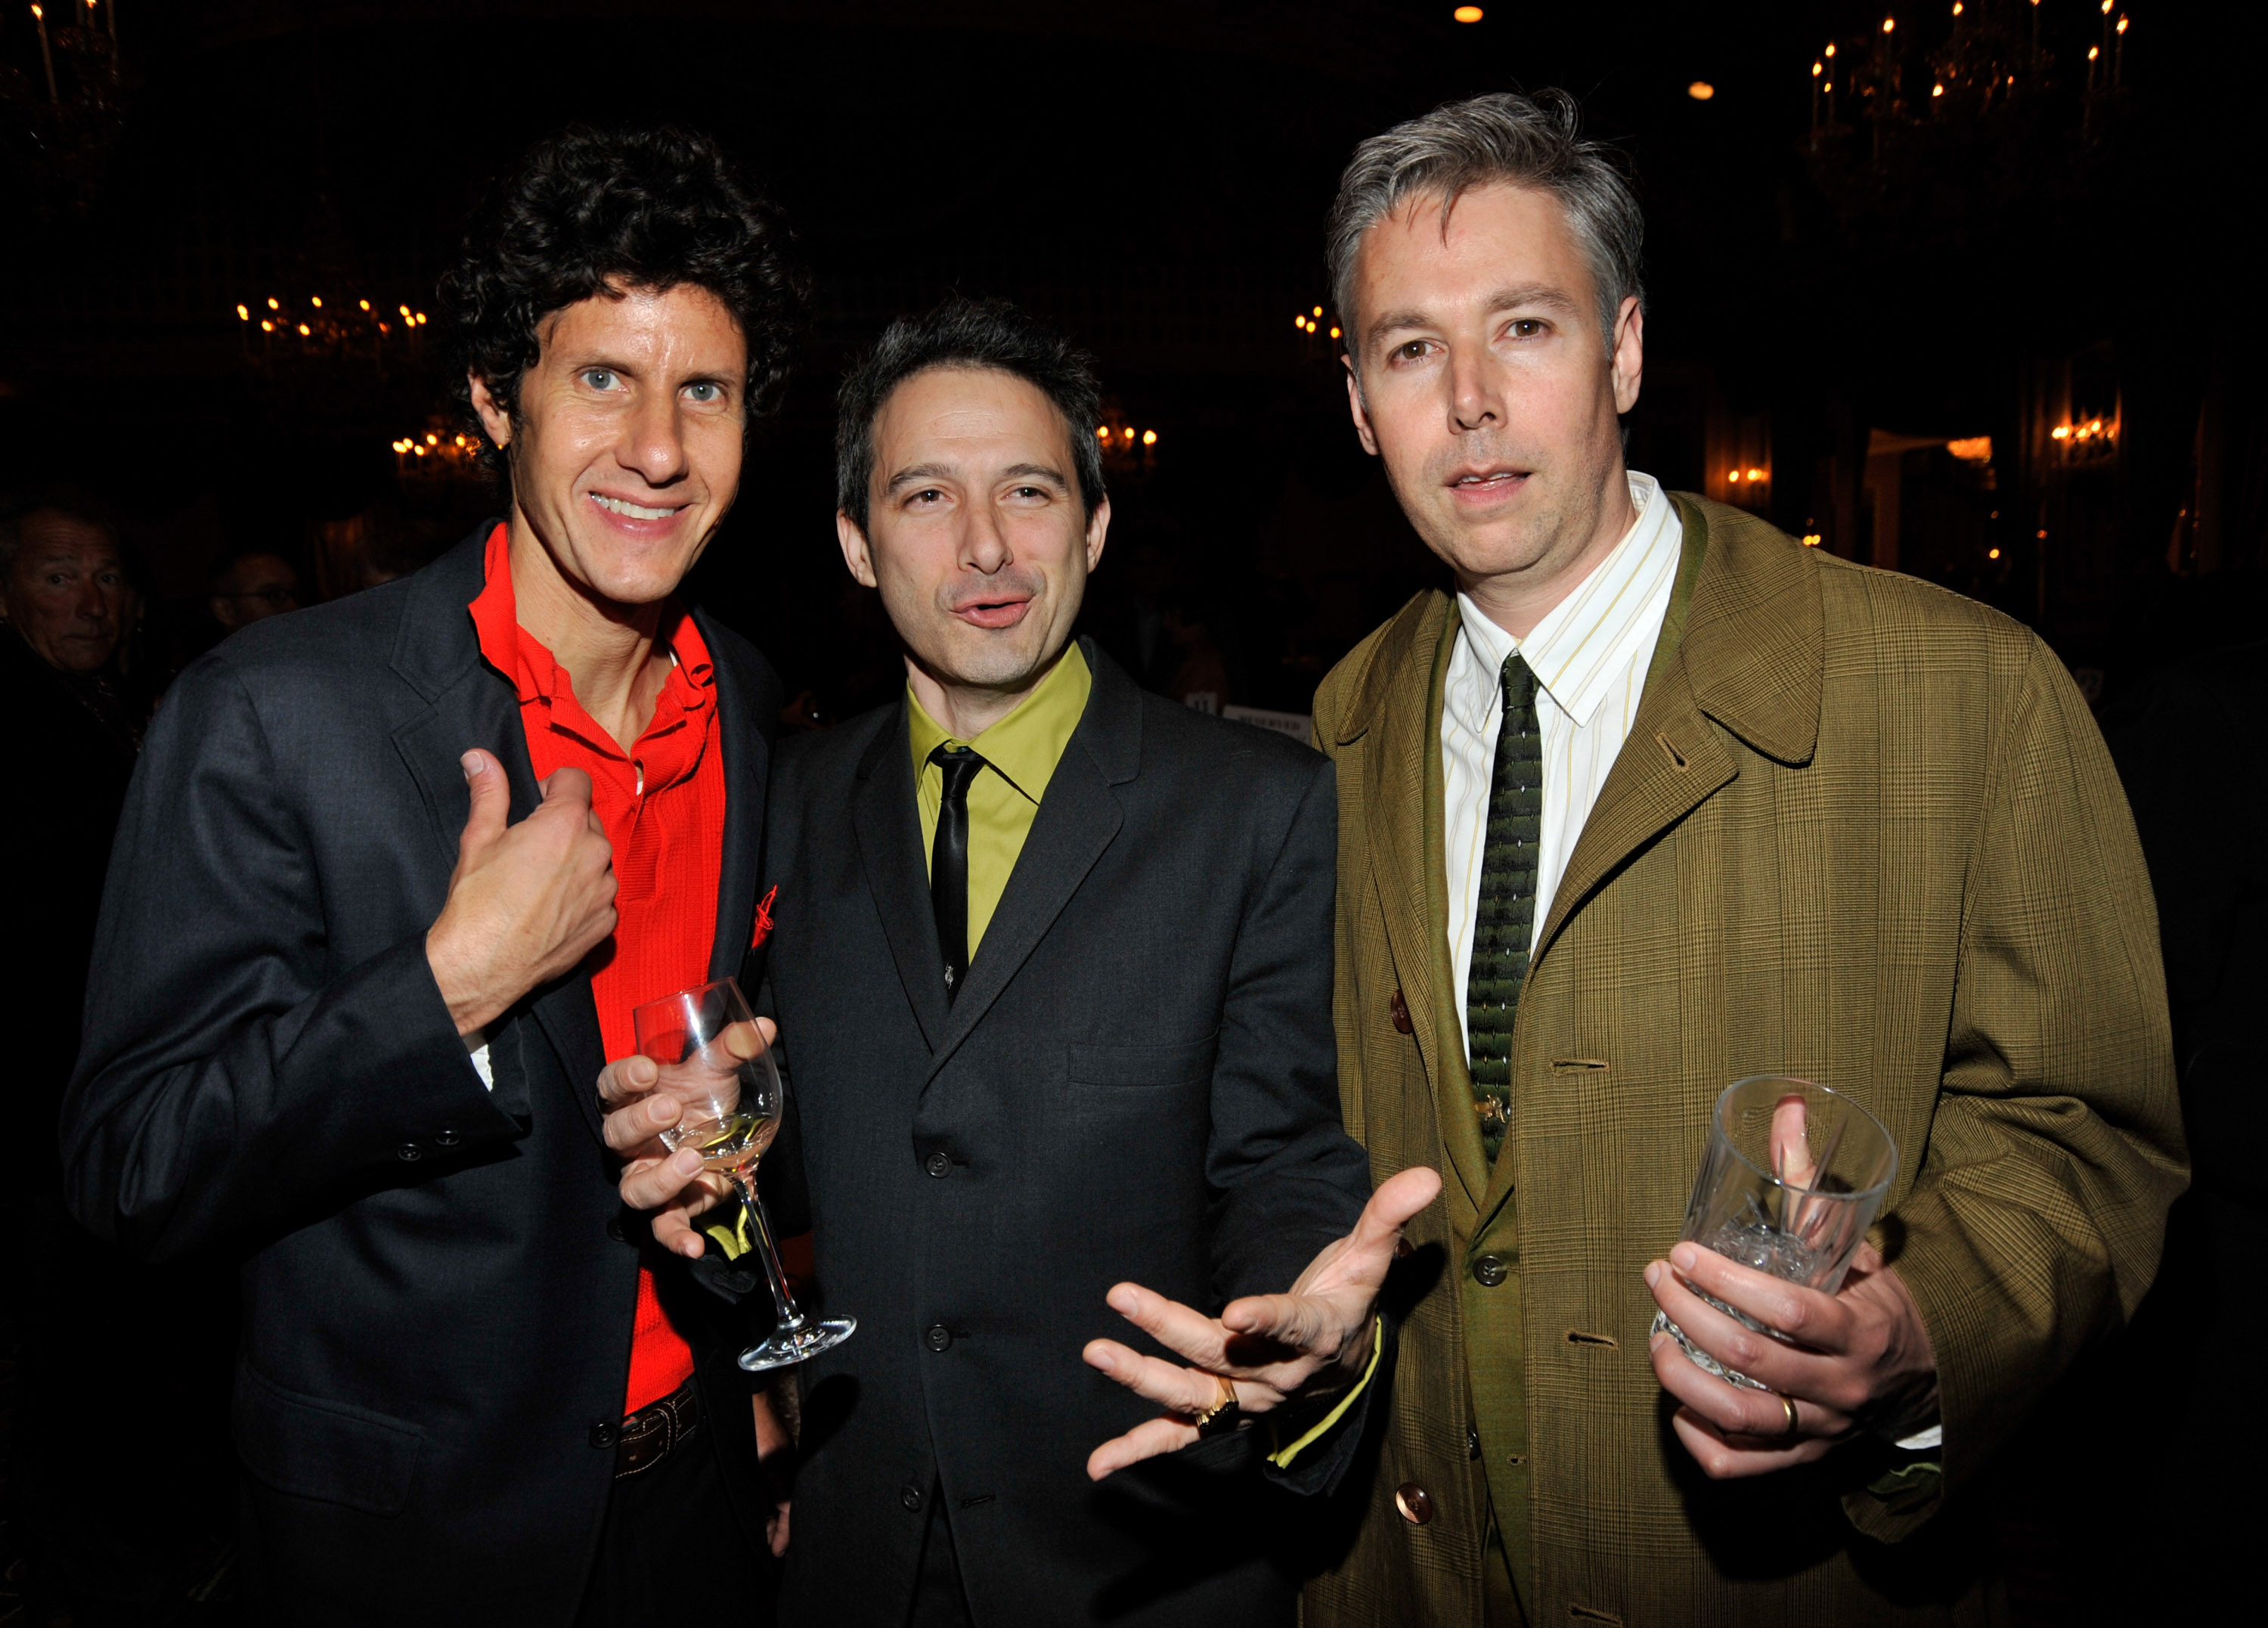 Michael 'Mike D' Diamond, Adam 'Ad-Rock' Horovitz and Adam 'MCA' Yauch of The Beastie Boys attends the after party for HBO films presents "Grey Gardens" New York premiere at the Pierre Hotel on April 14, 2009 in New York City. (Kevin Mazur&mdash;WireImage)